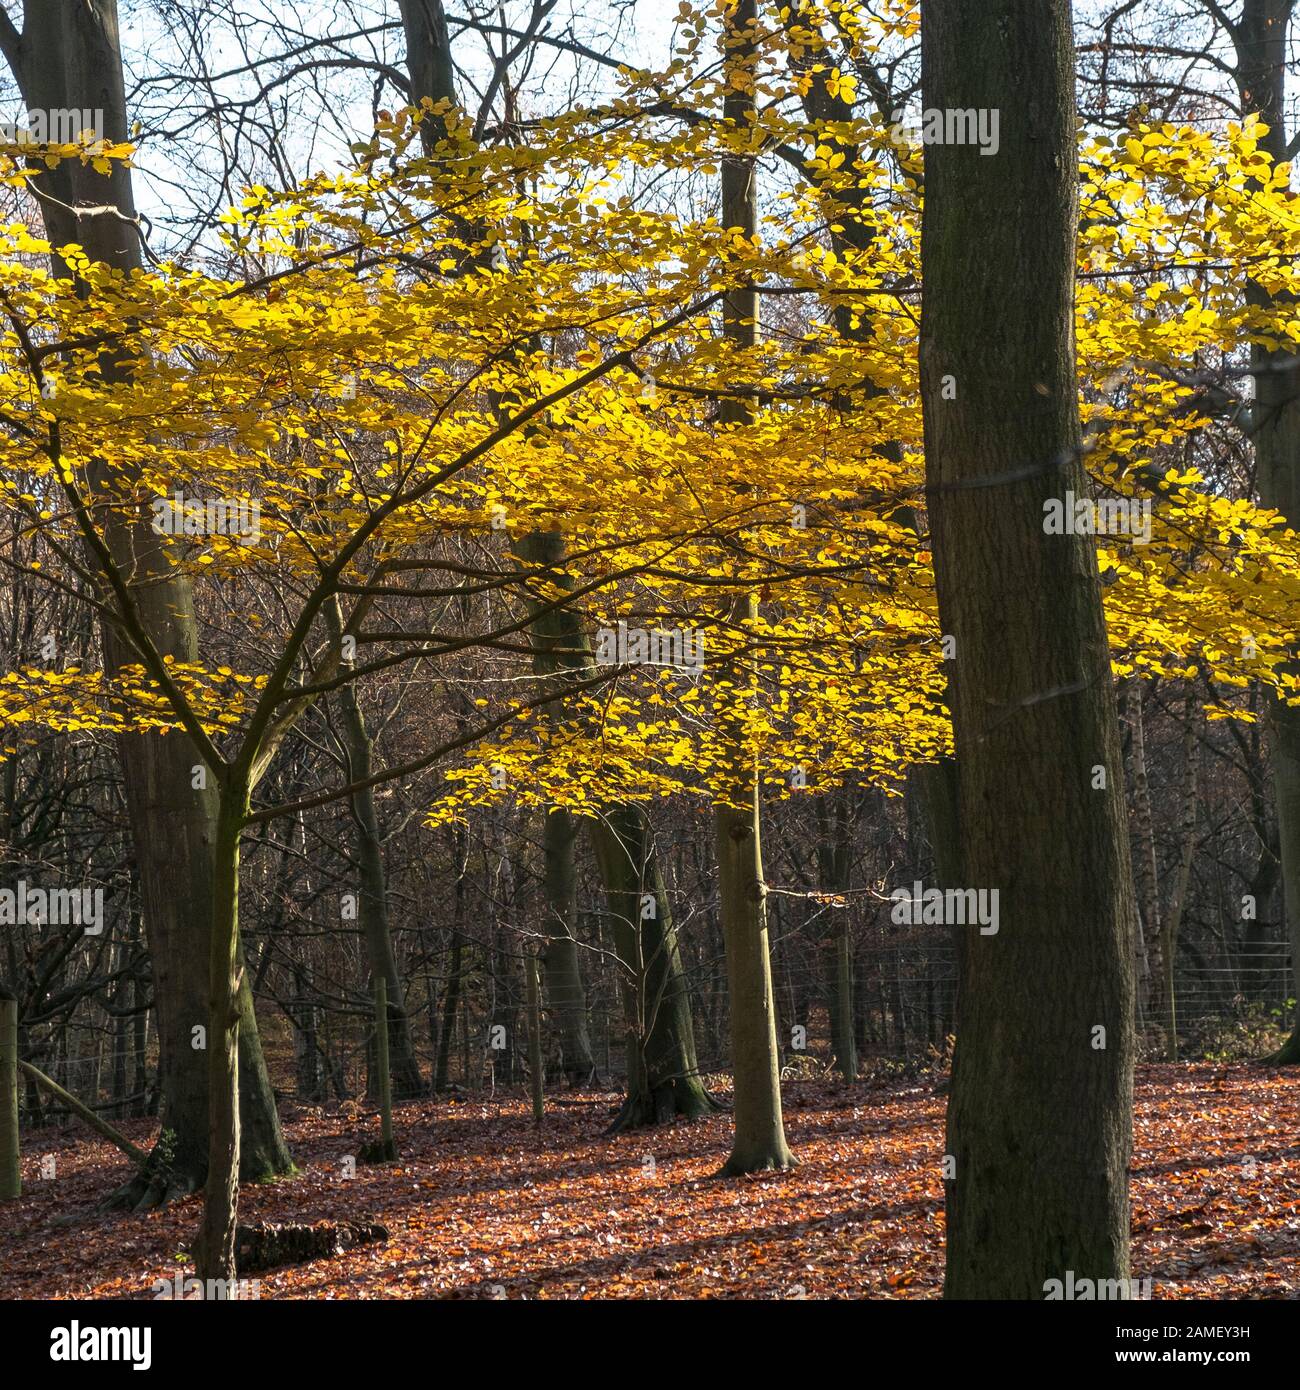 A young Beech Tree Fagus sylvatica with golden yellow leaves backlit by late autumnal sunlight in Thorndon Park North in Brentwood in Essex. Stock Photo